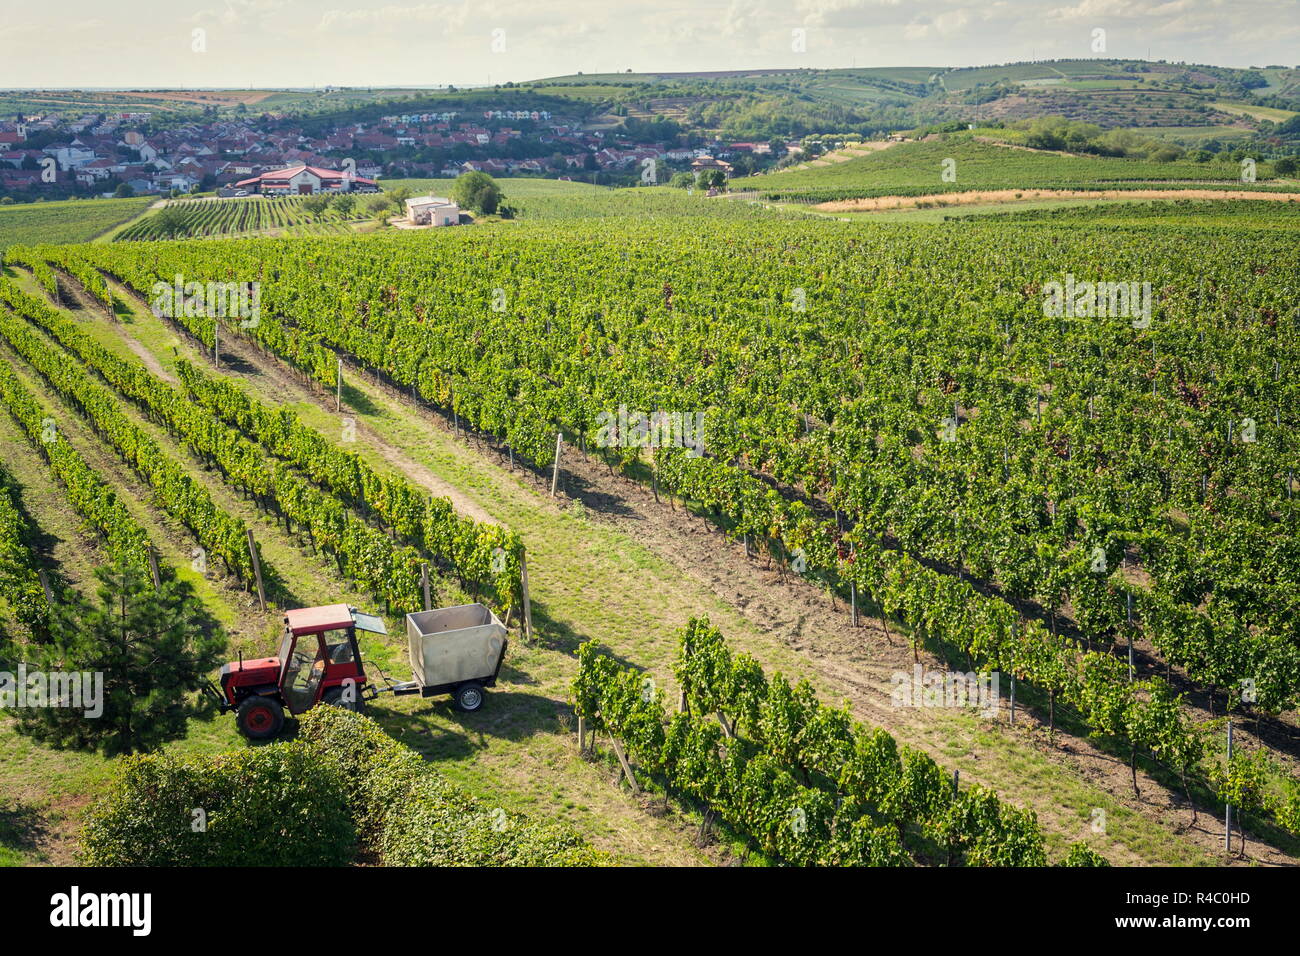 Red tractor ready for harvesting grapes in vineyard, sunny autumn day, Southern Moravia, Czech Republic Stock Photo